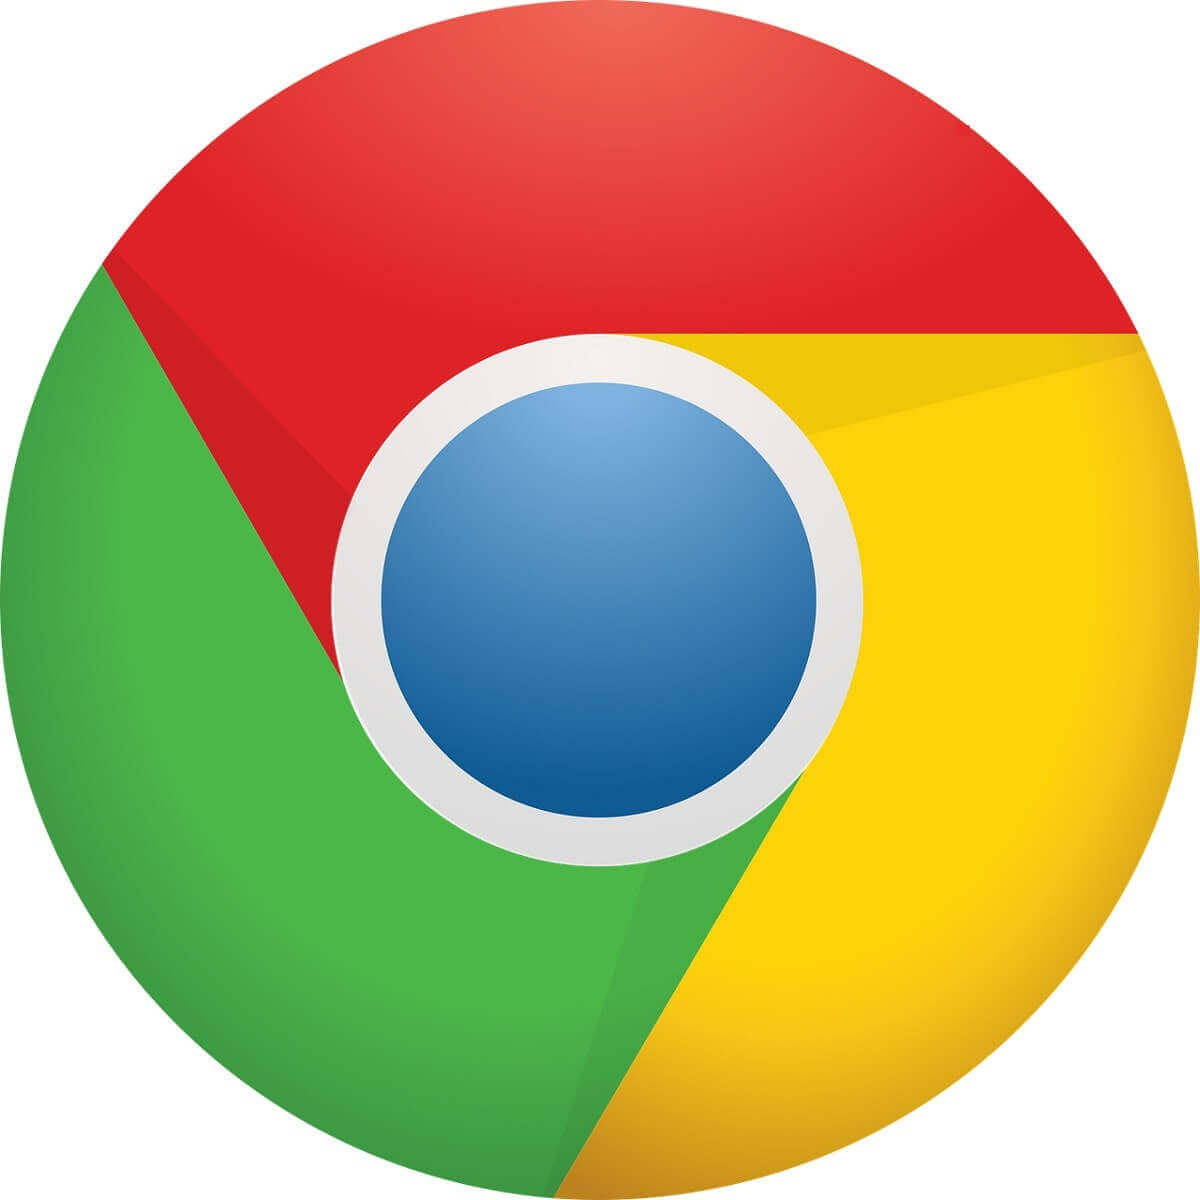 best flash player extensions for chrome